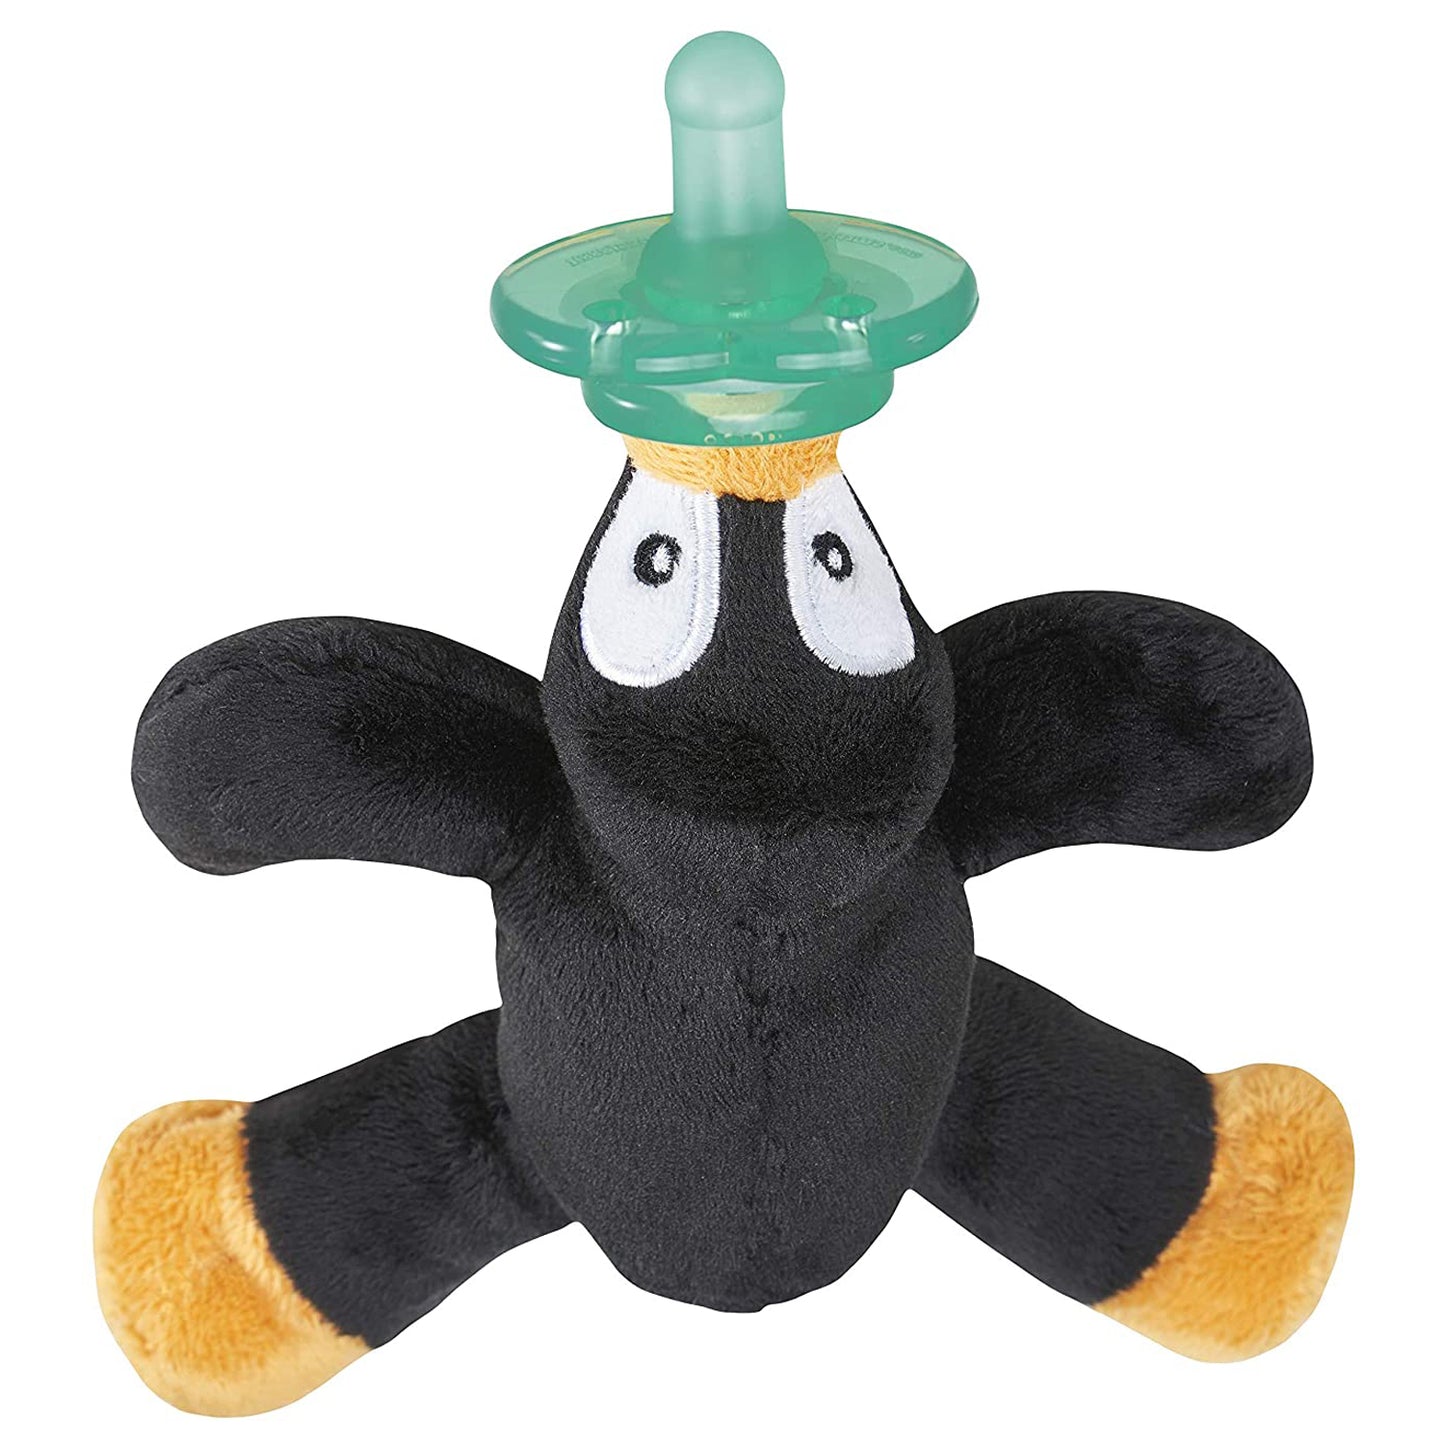 Pacifier Holder and Rattle - Puck the Penguin